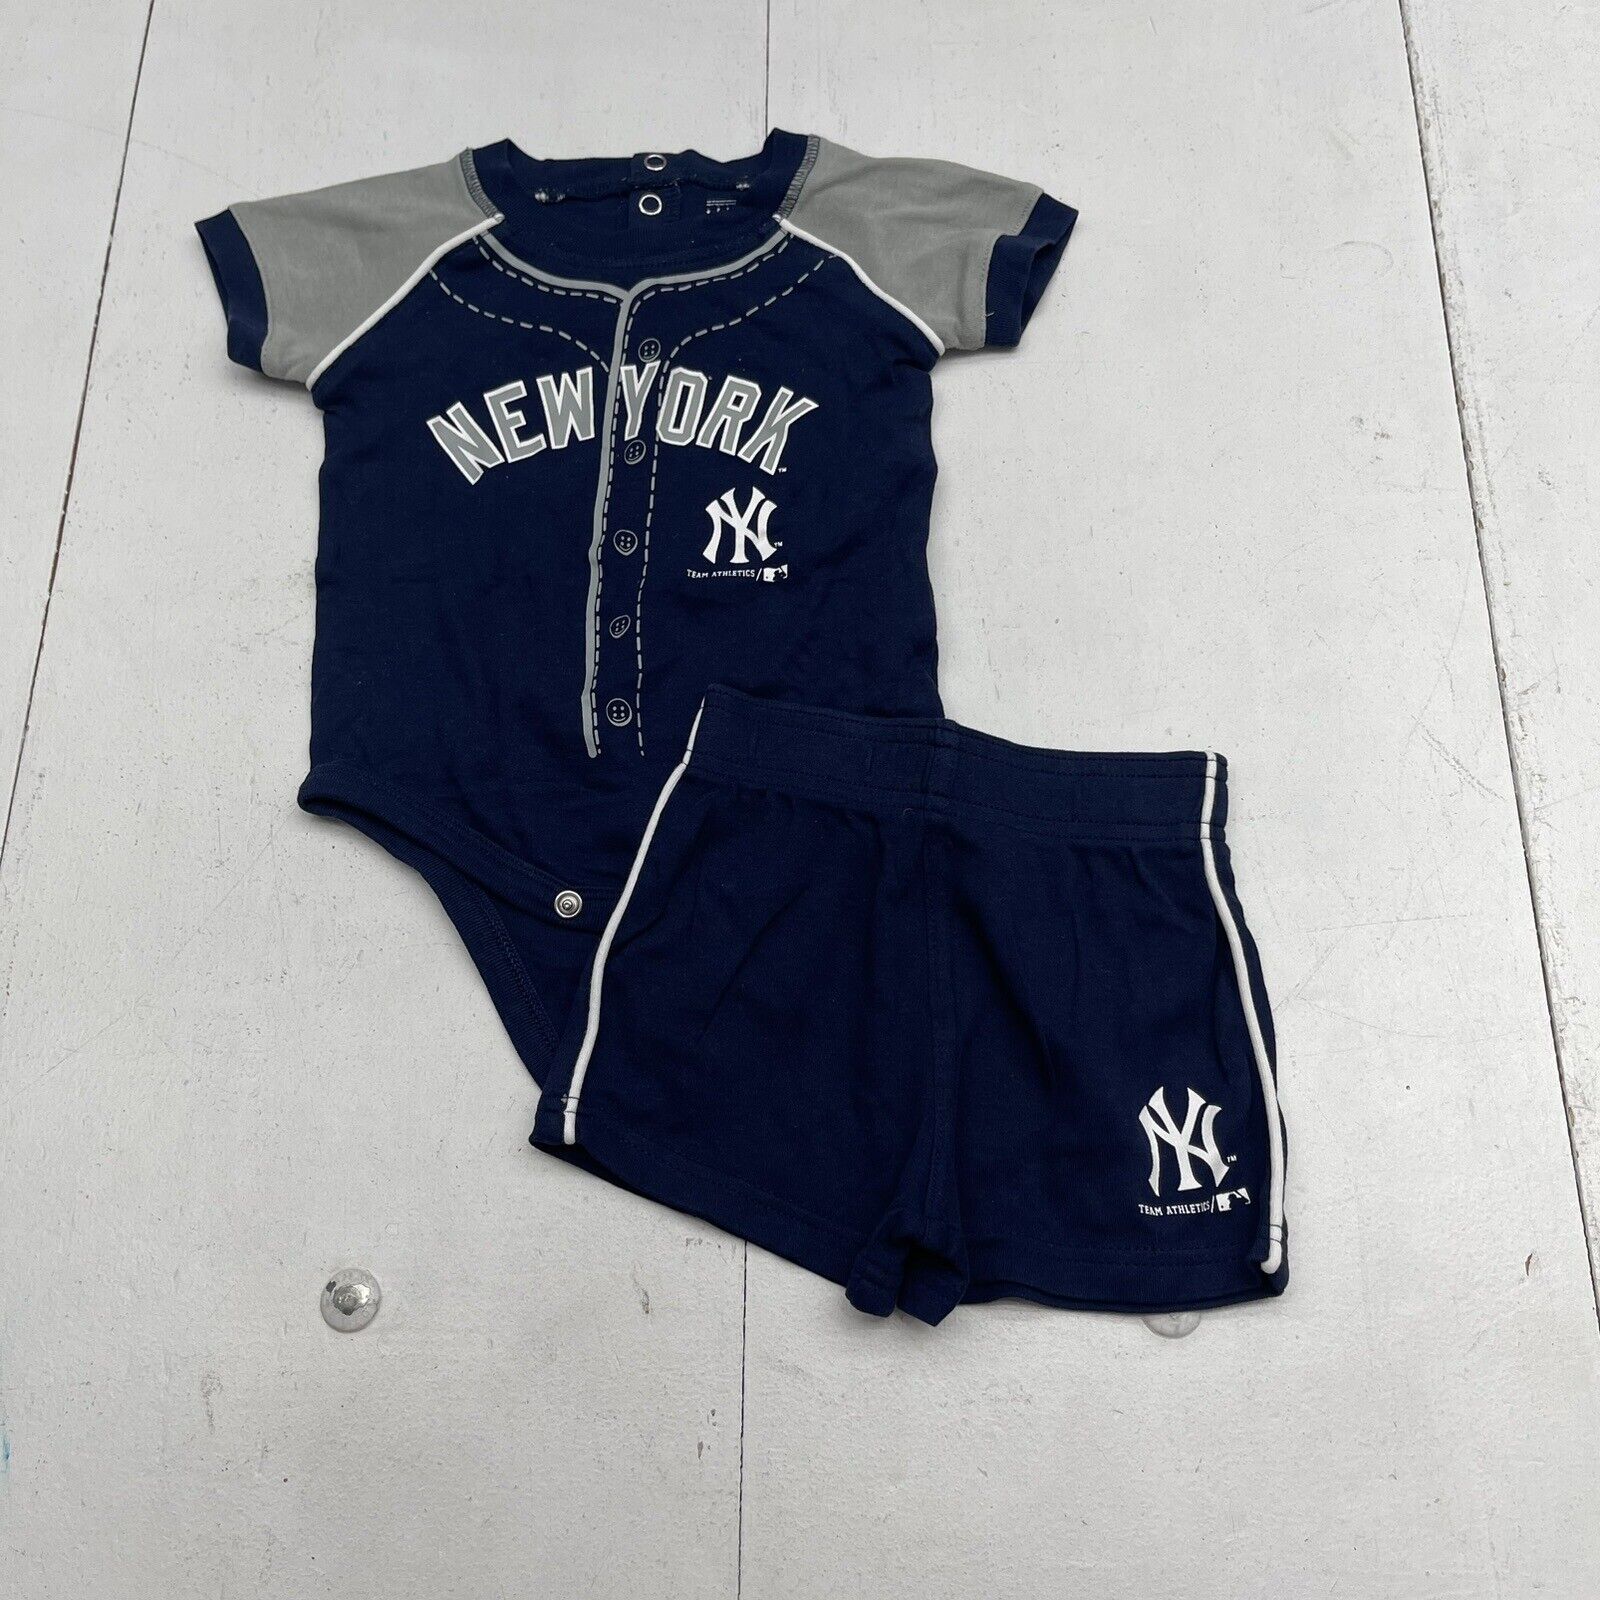 New York Yankees Apparel, Yankees Jersey, Yankees Clothing and Gear